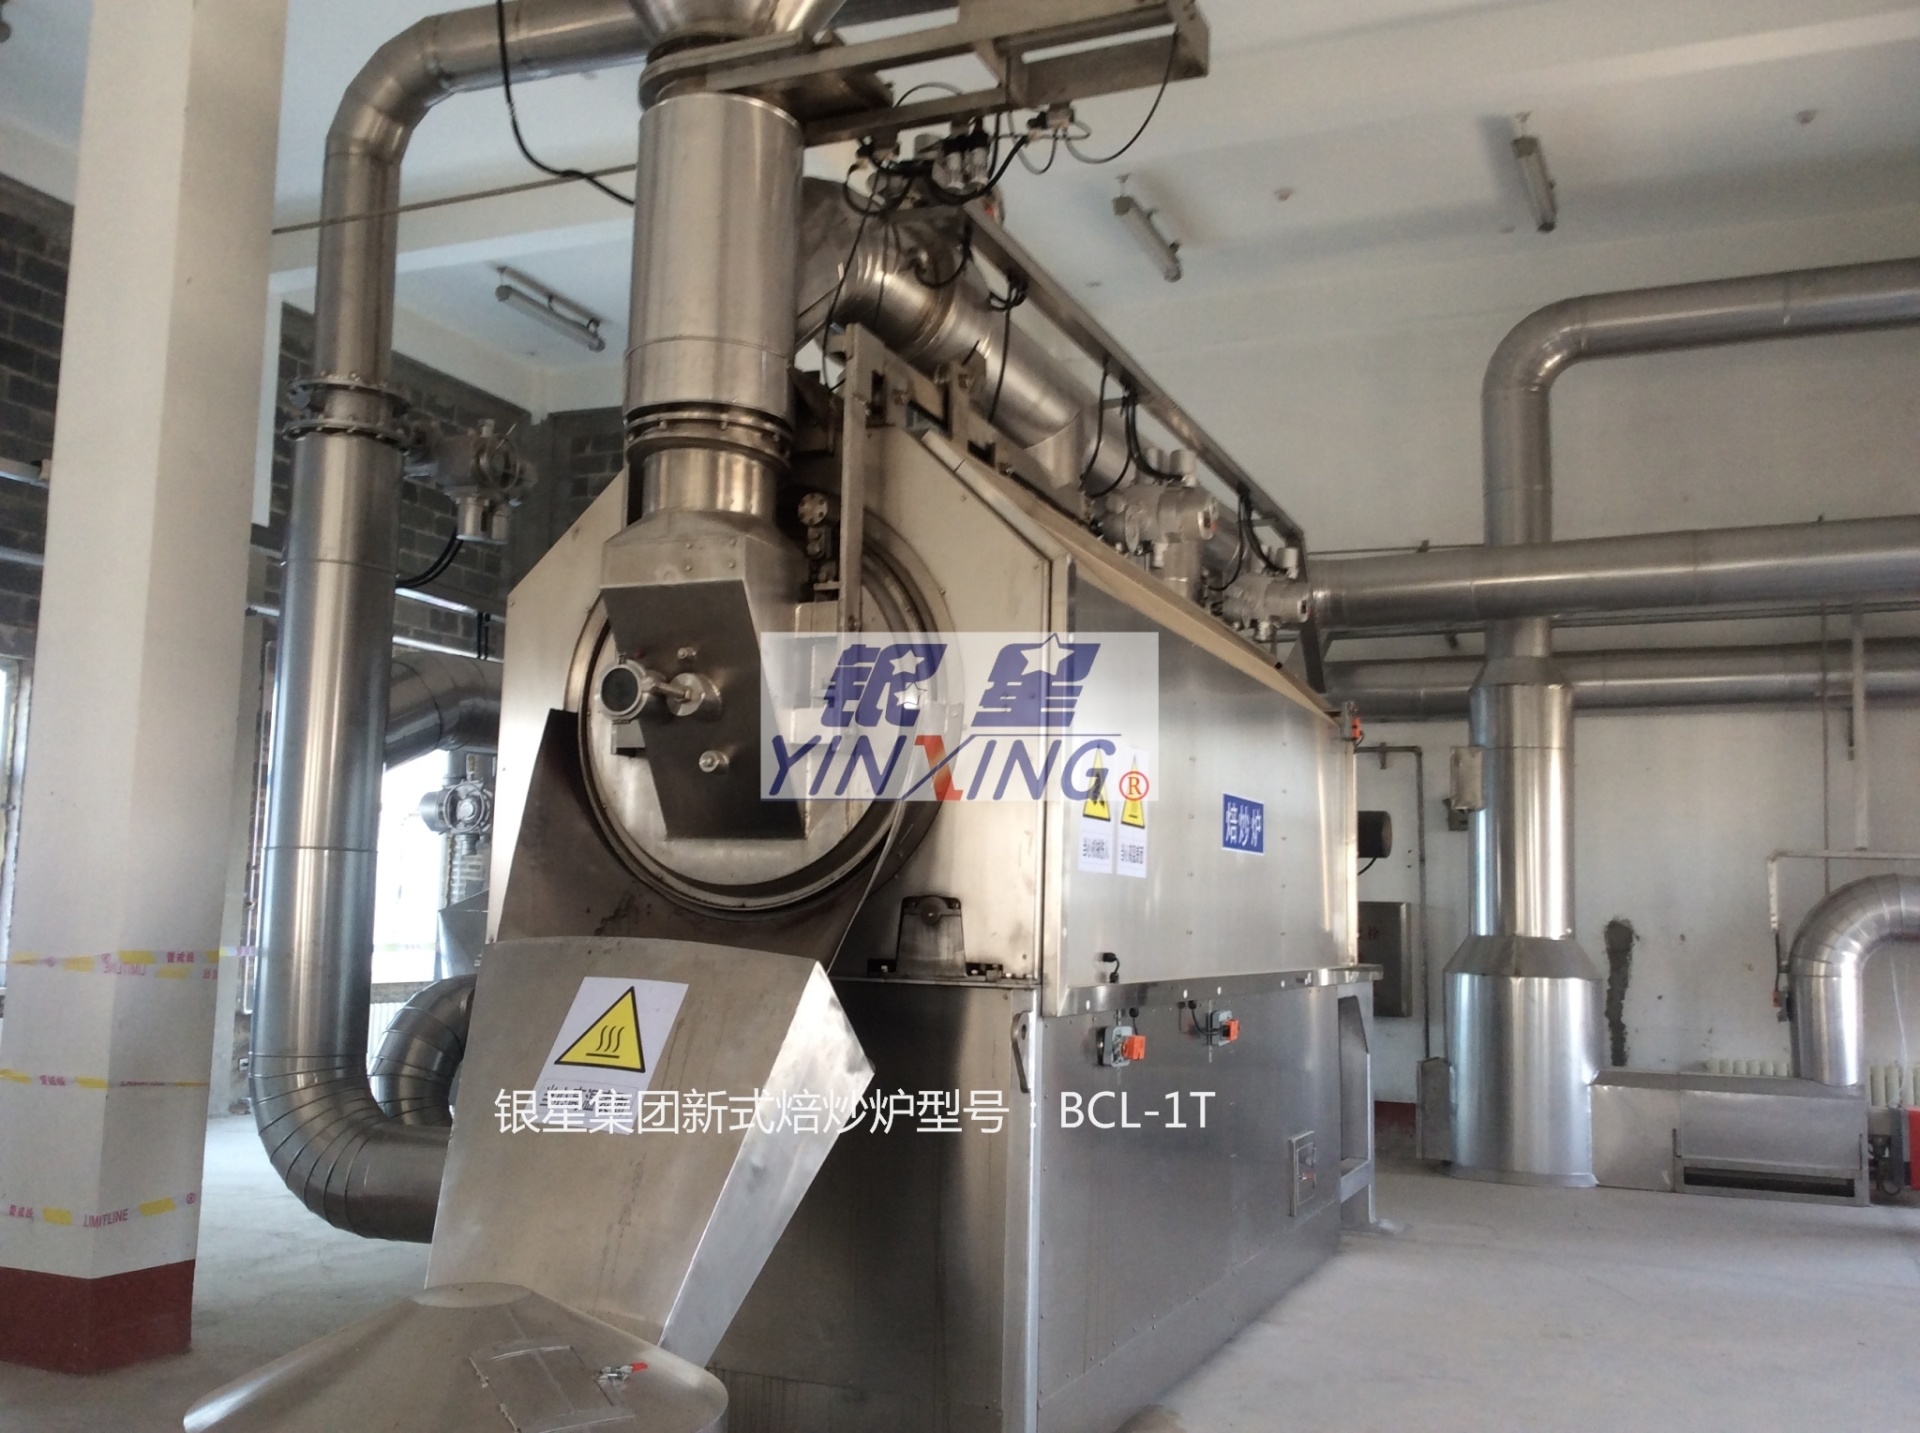 In 2016, Yinxing and Dalian COFCO group jointly established a malt roasting system in China